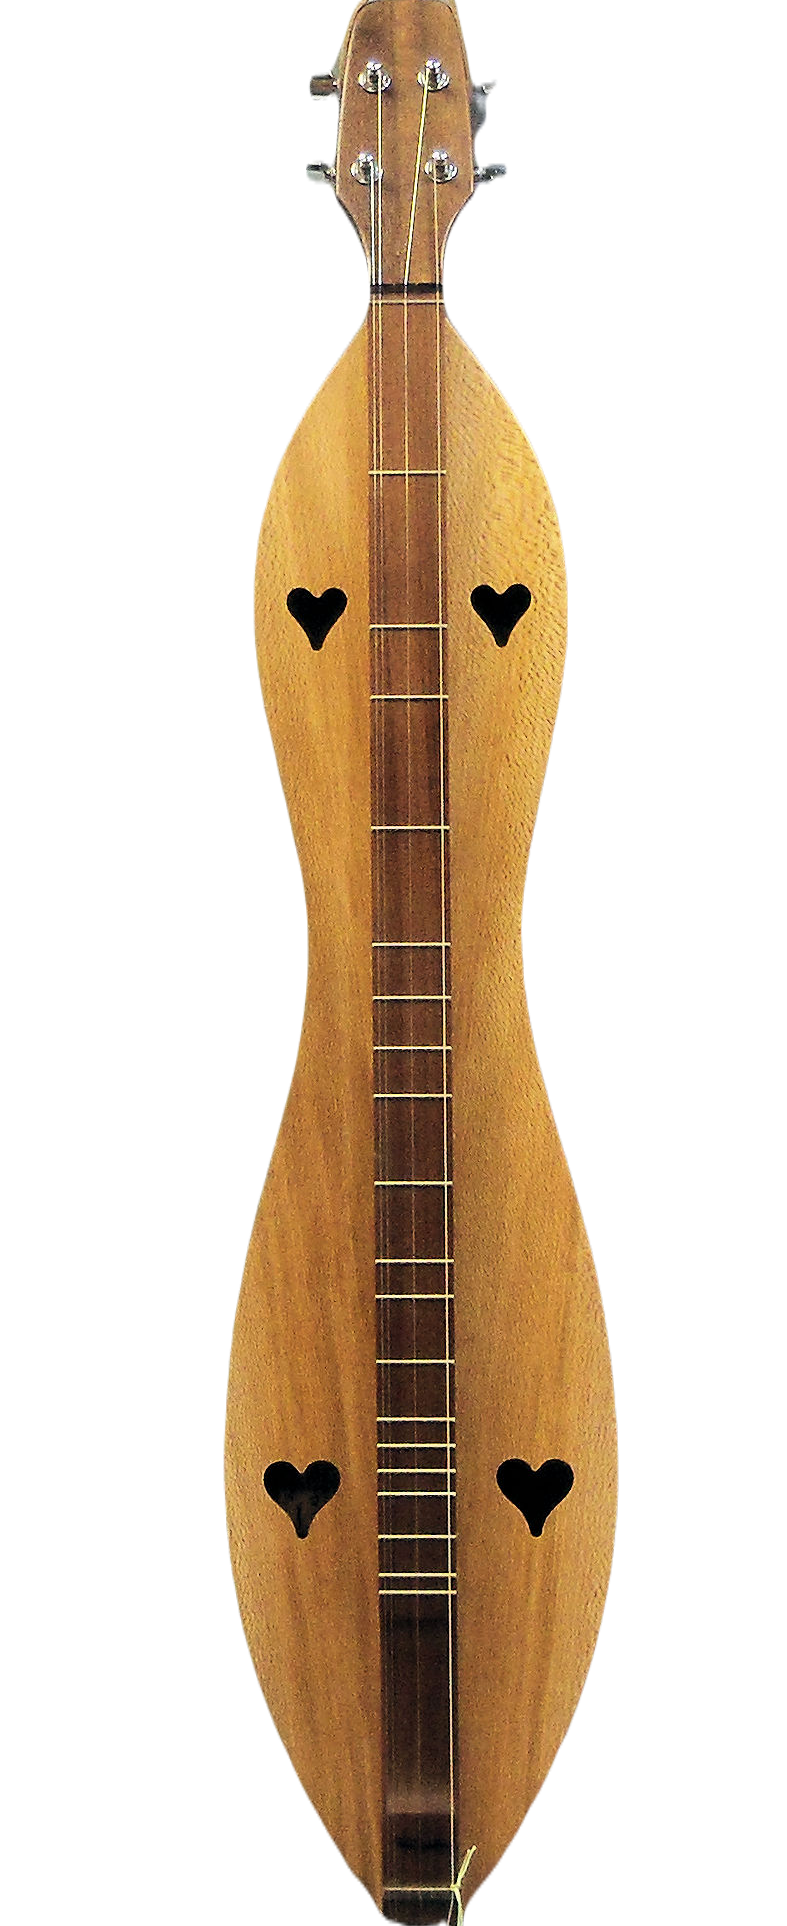 A 4 String, Flathead, Hourglass with Walnut back, sides and Spalted, Clear or Quartersawn Sycamore top (4FHWSY) acoustic guitar with a wooden body.